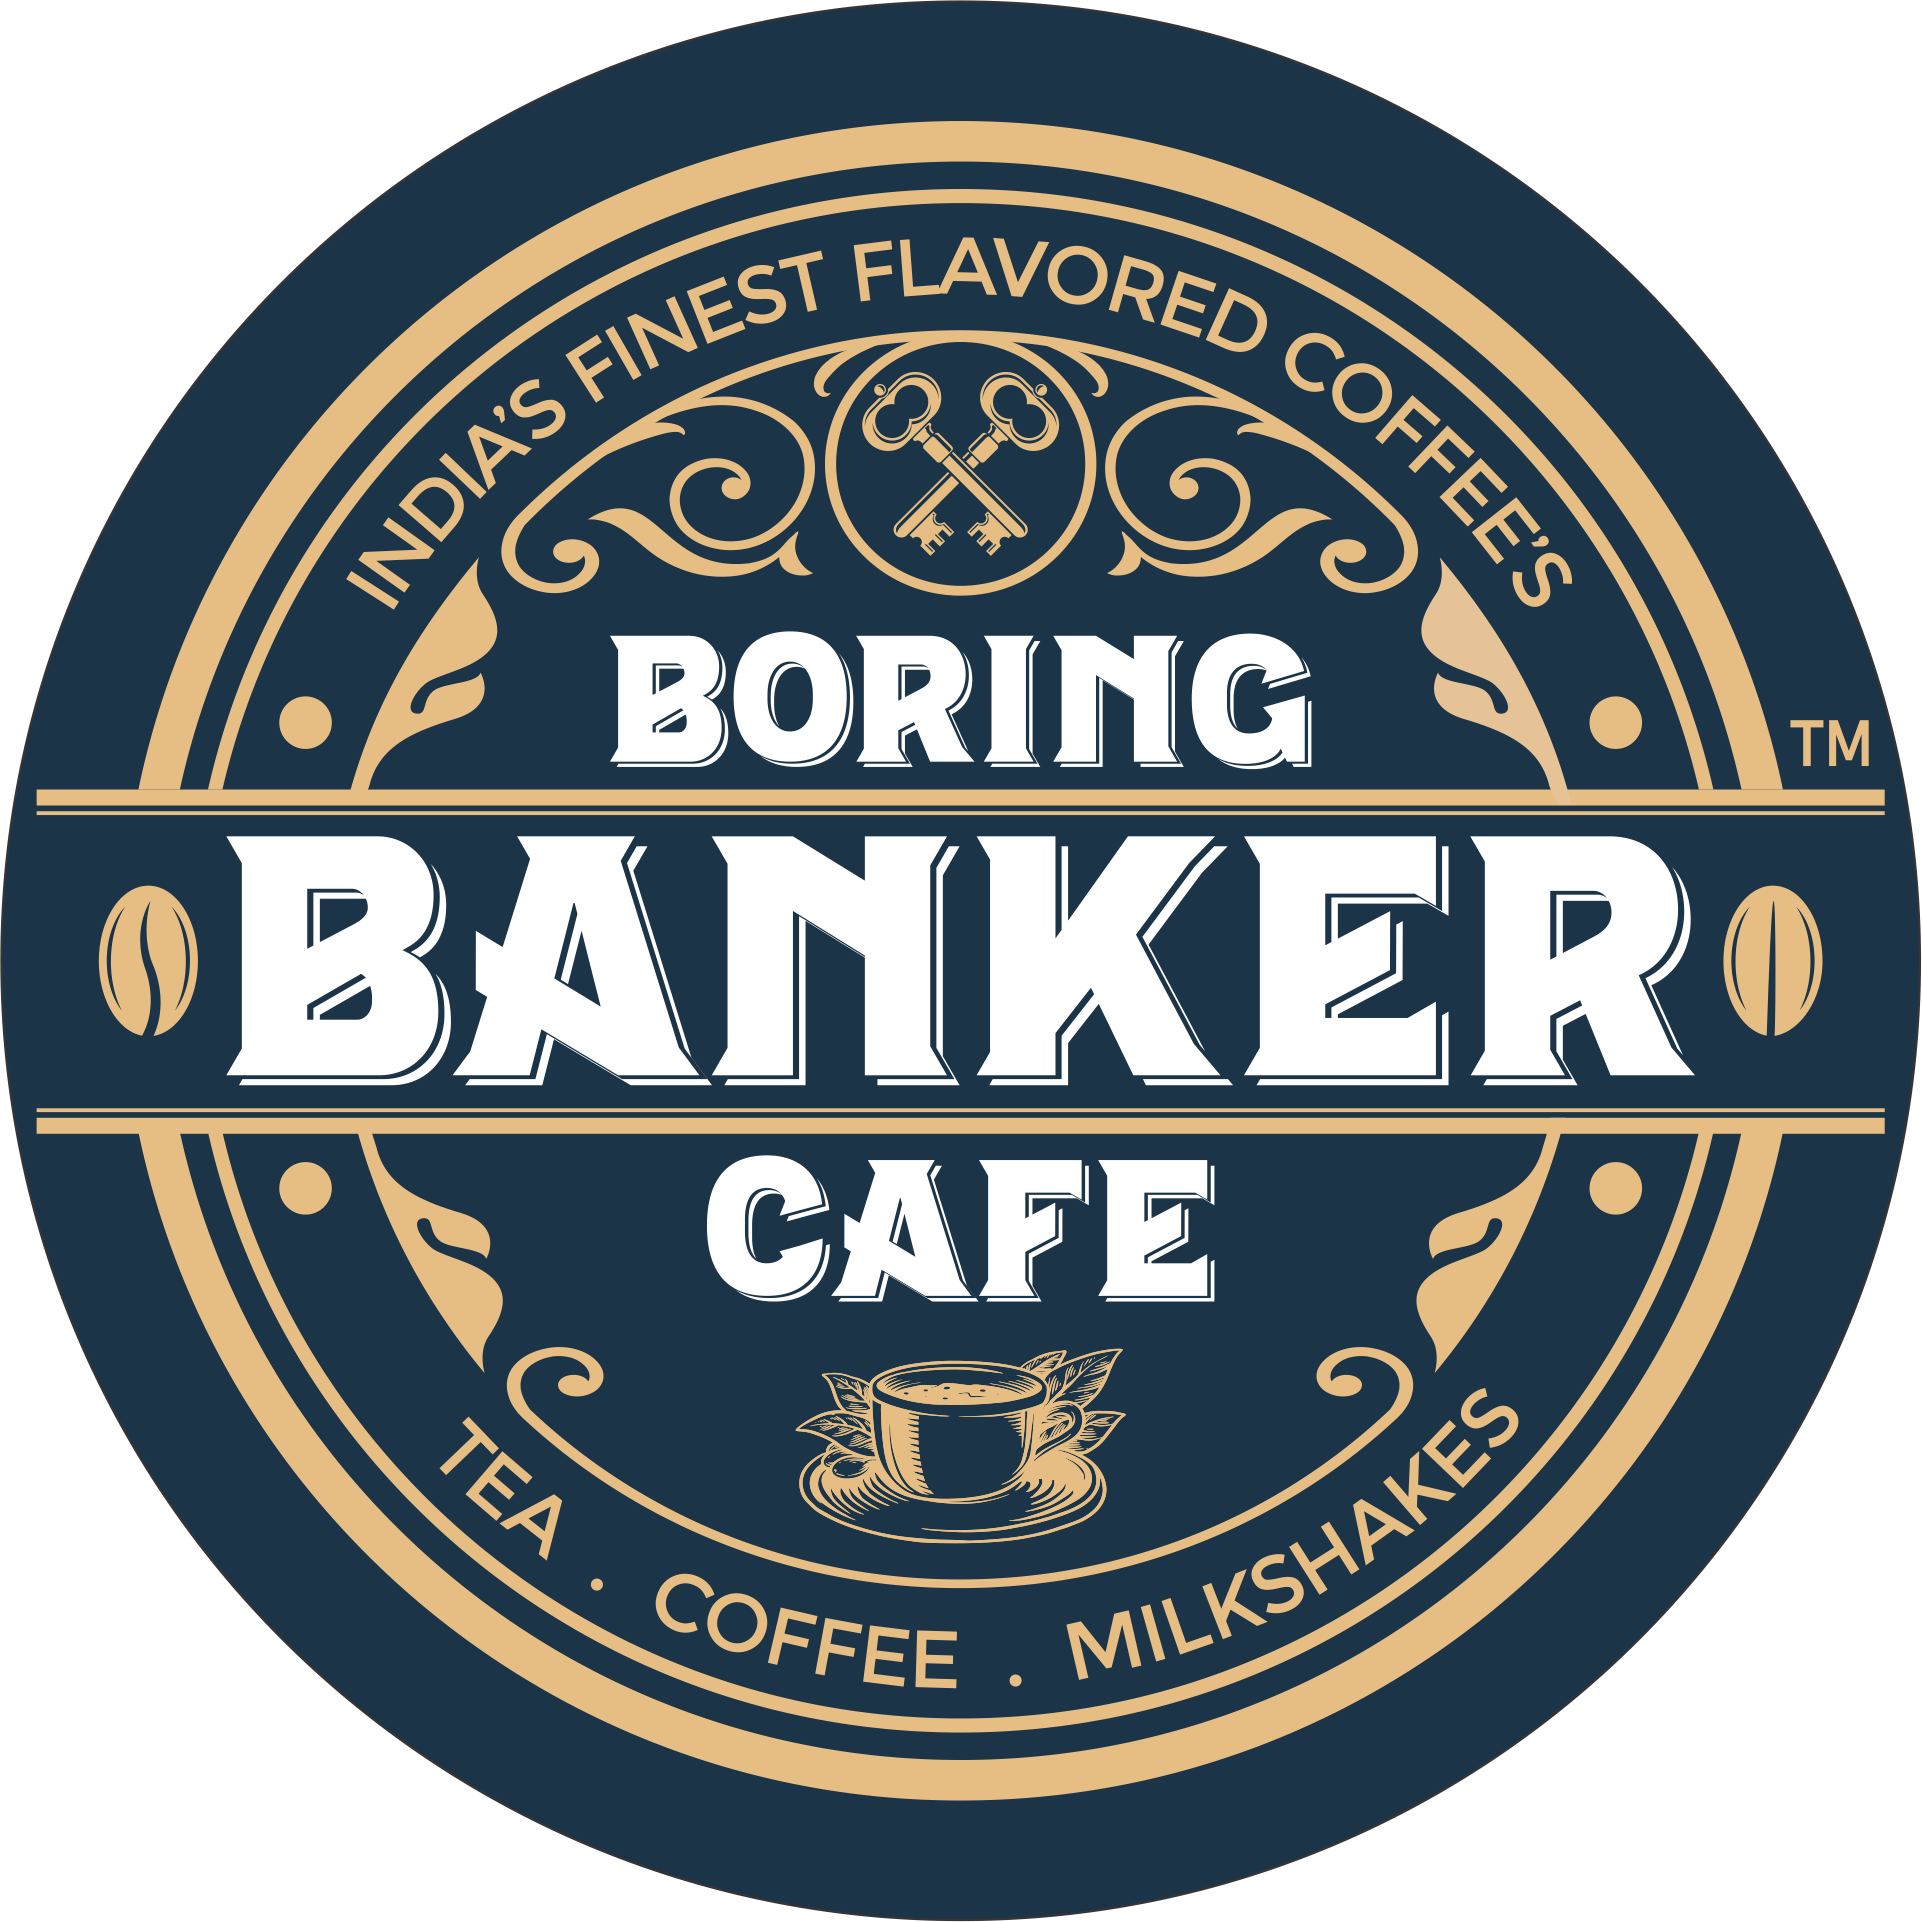 WHISKY COFFEE - Boring Banker Cafe